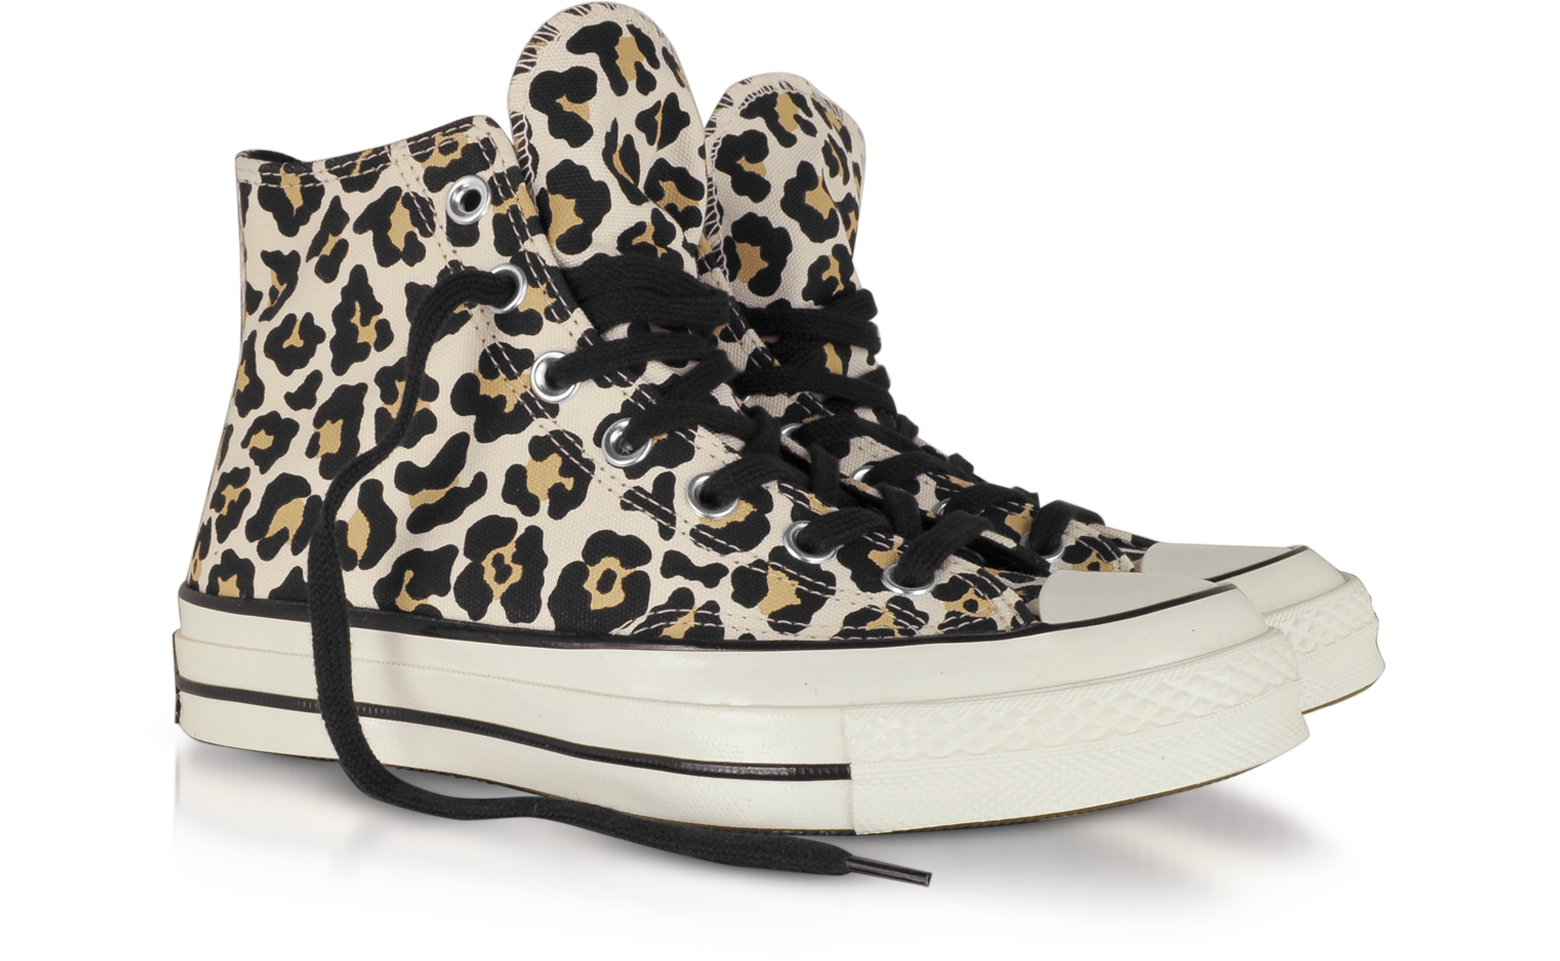 converse limited edition 2018 8c